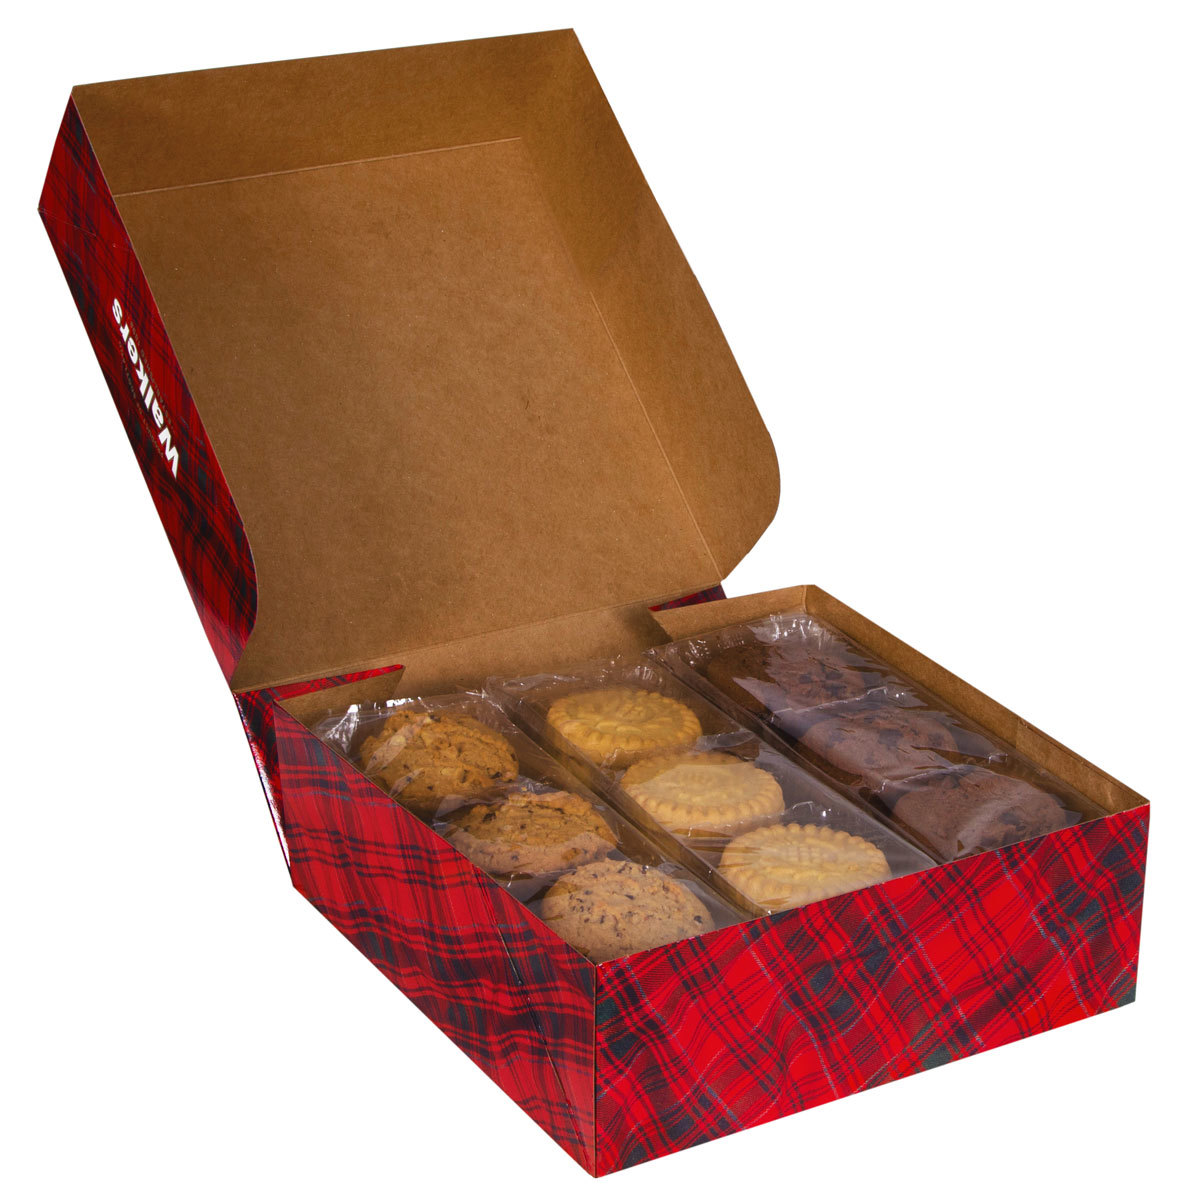 Open box displaying biscuits 2